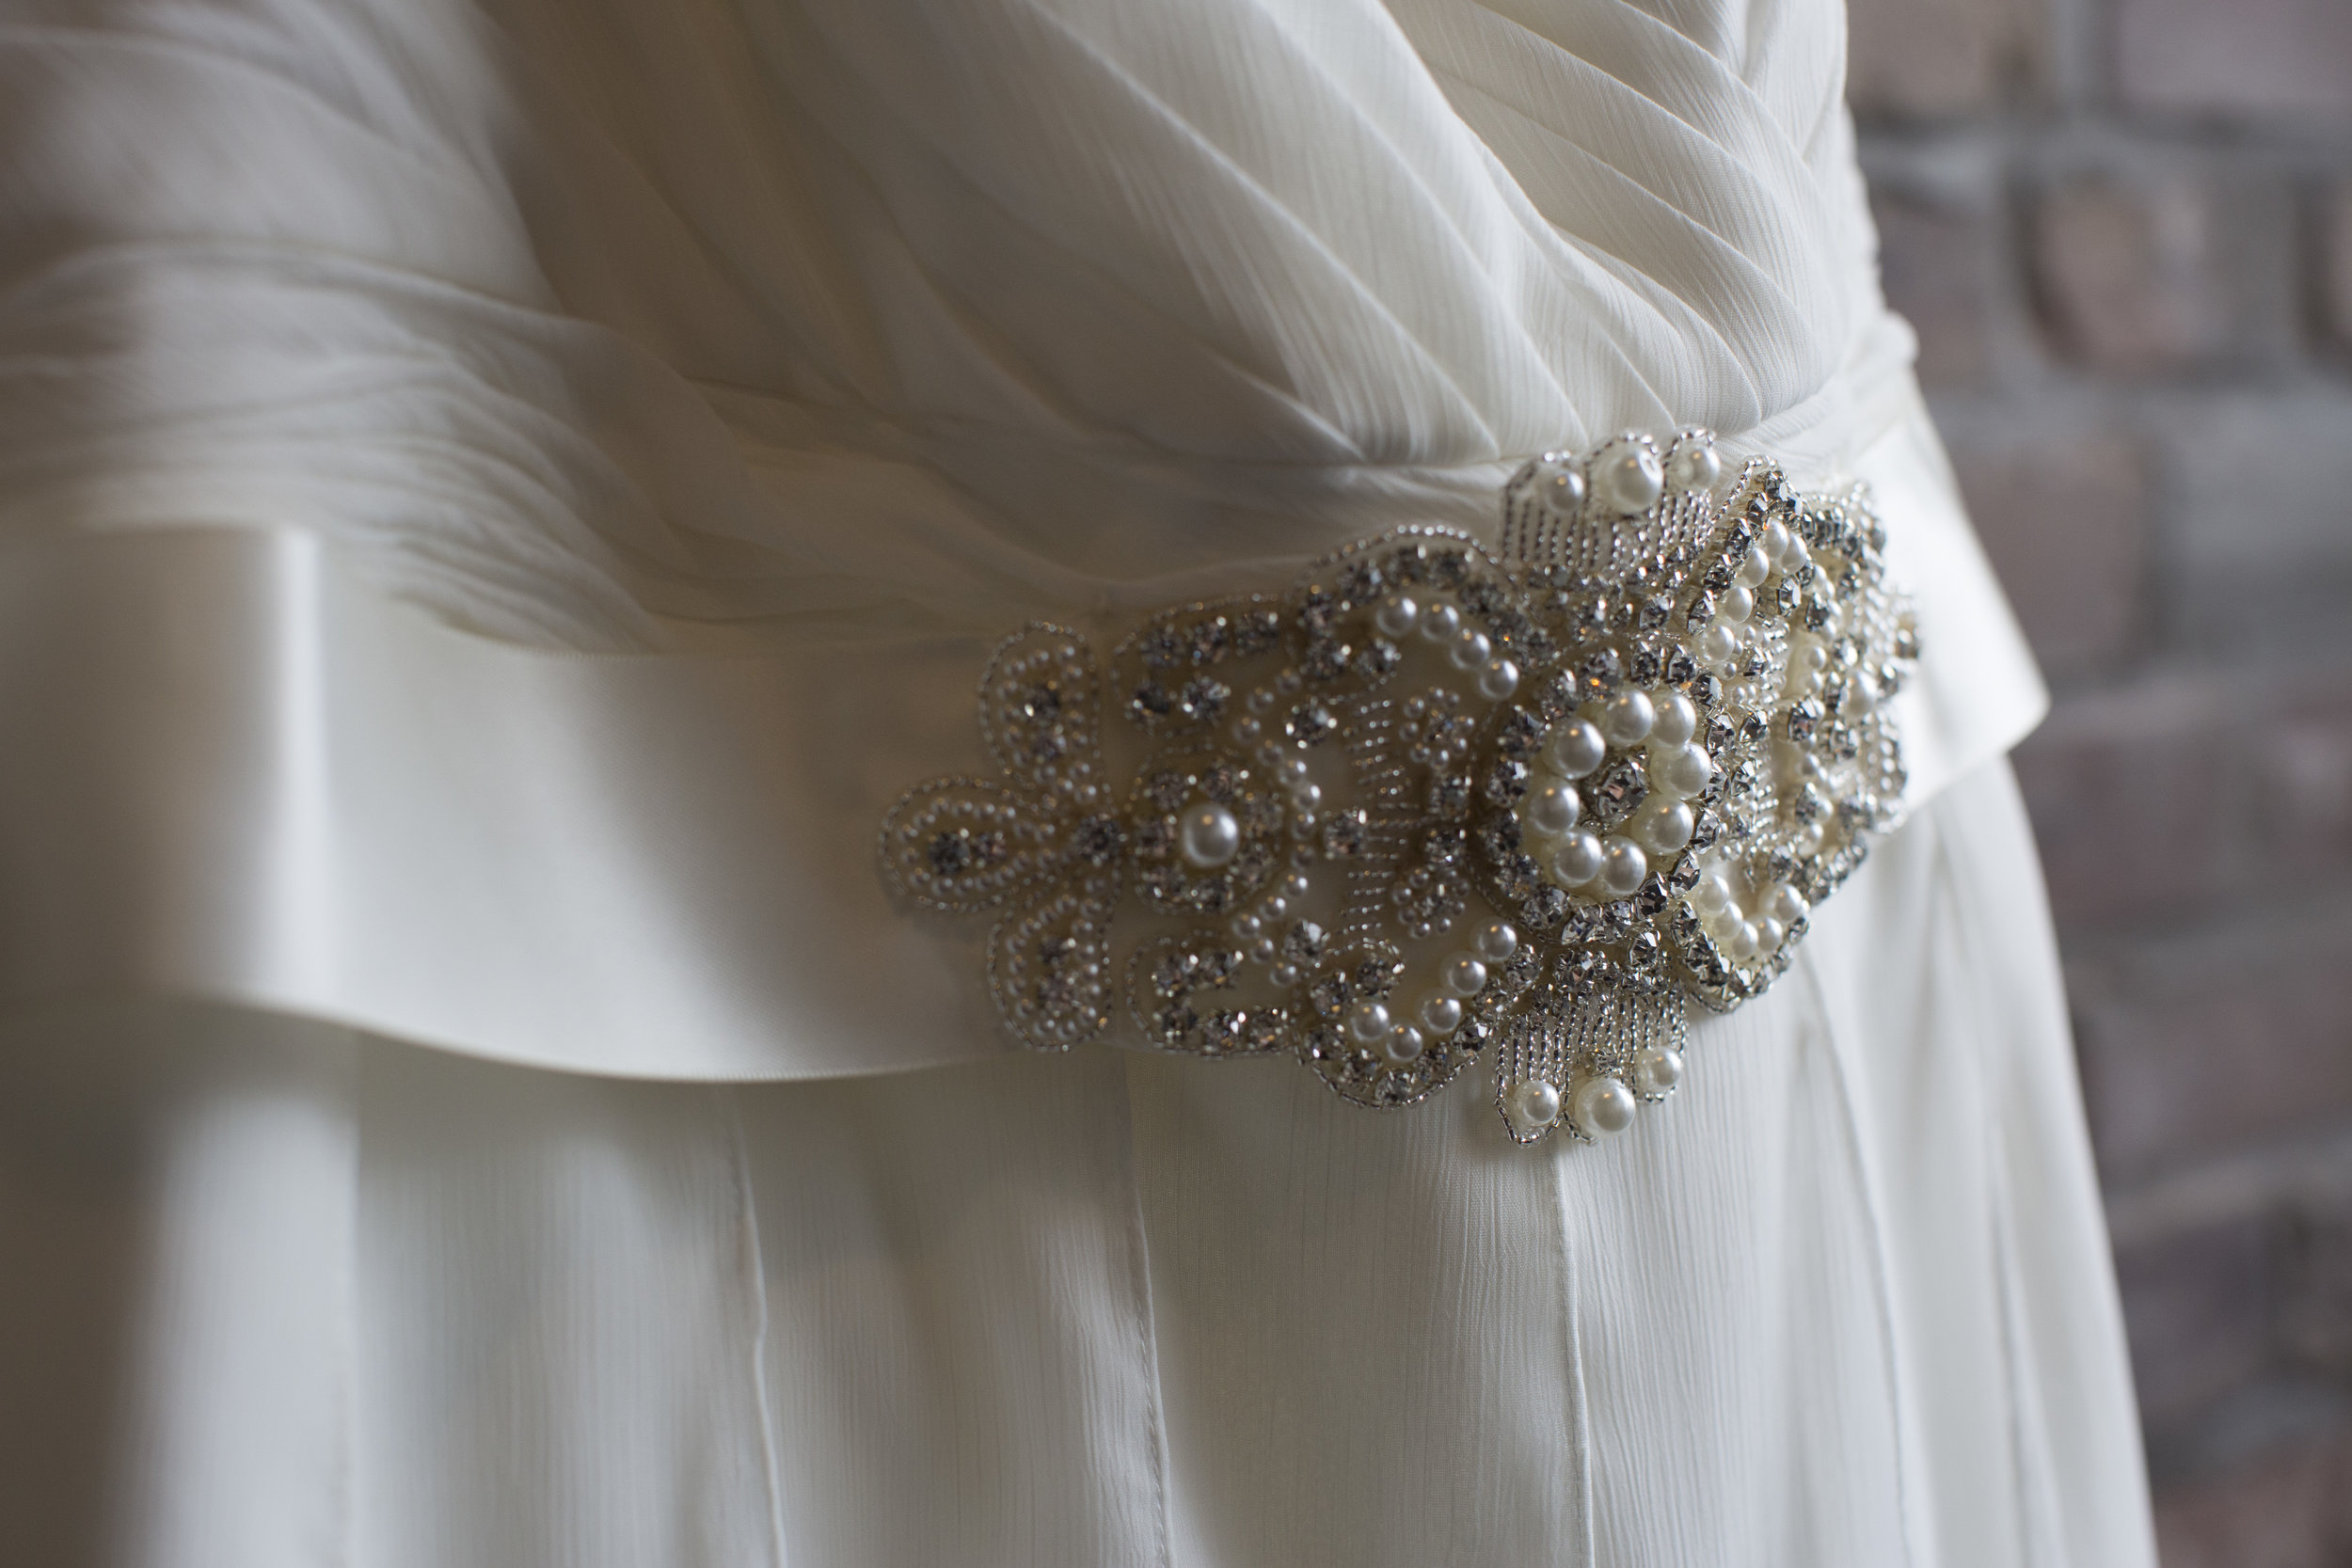 Carey added a touch of pearls & beads to her dreamy dress!